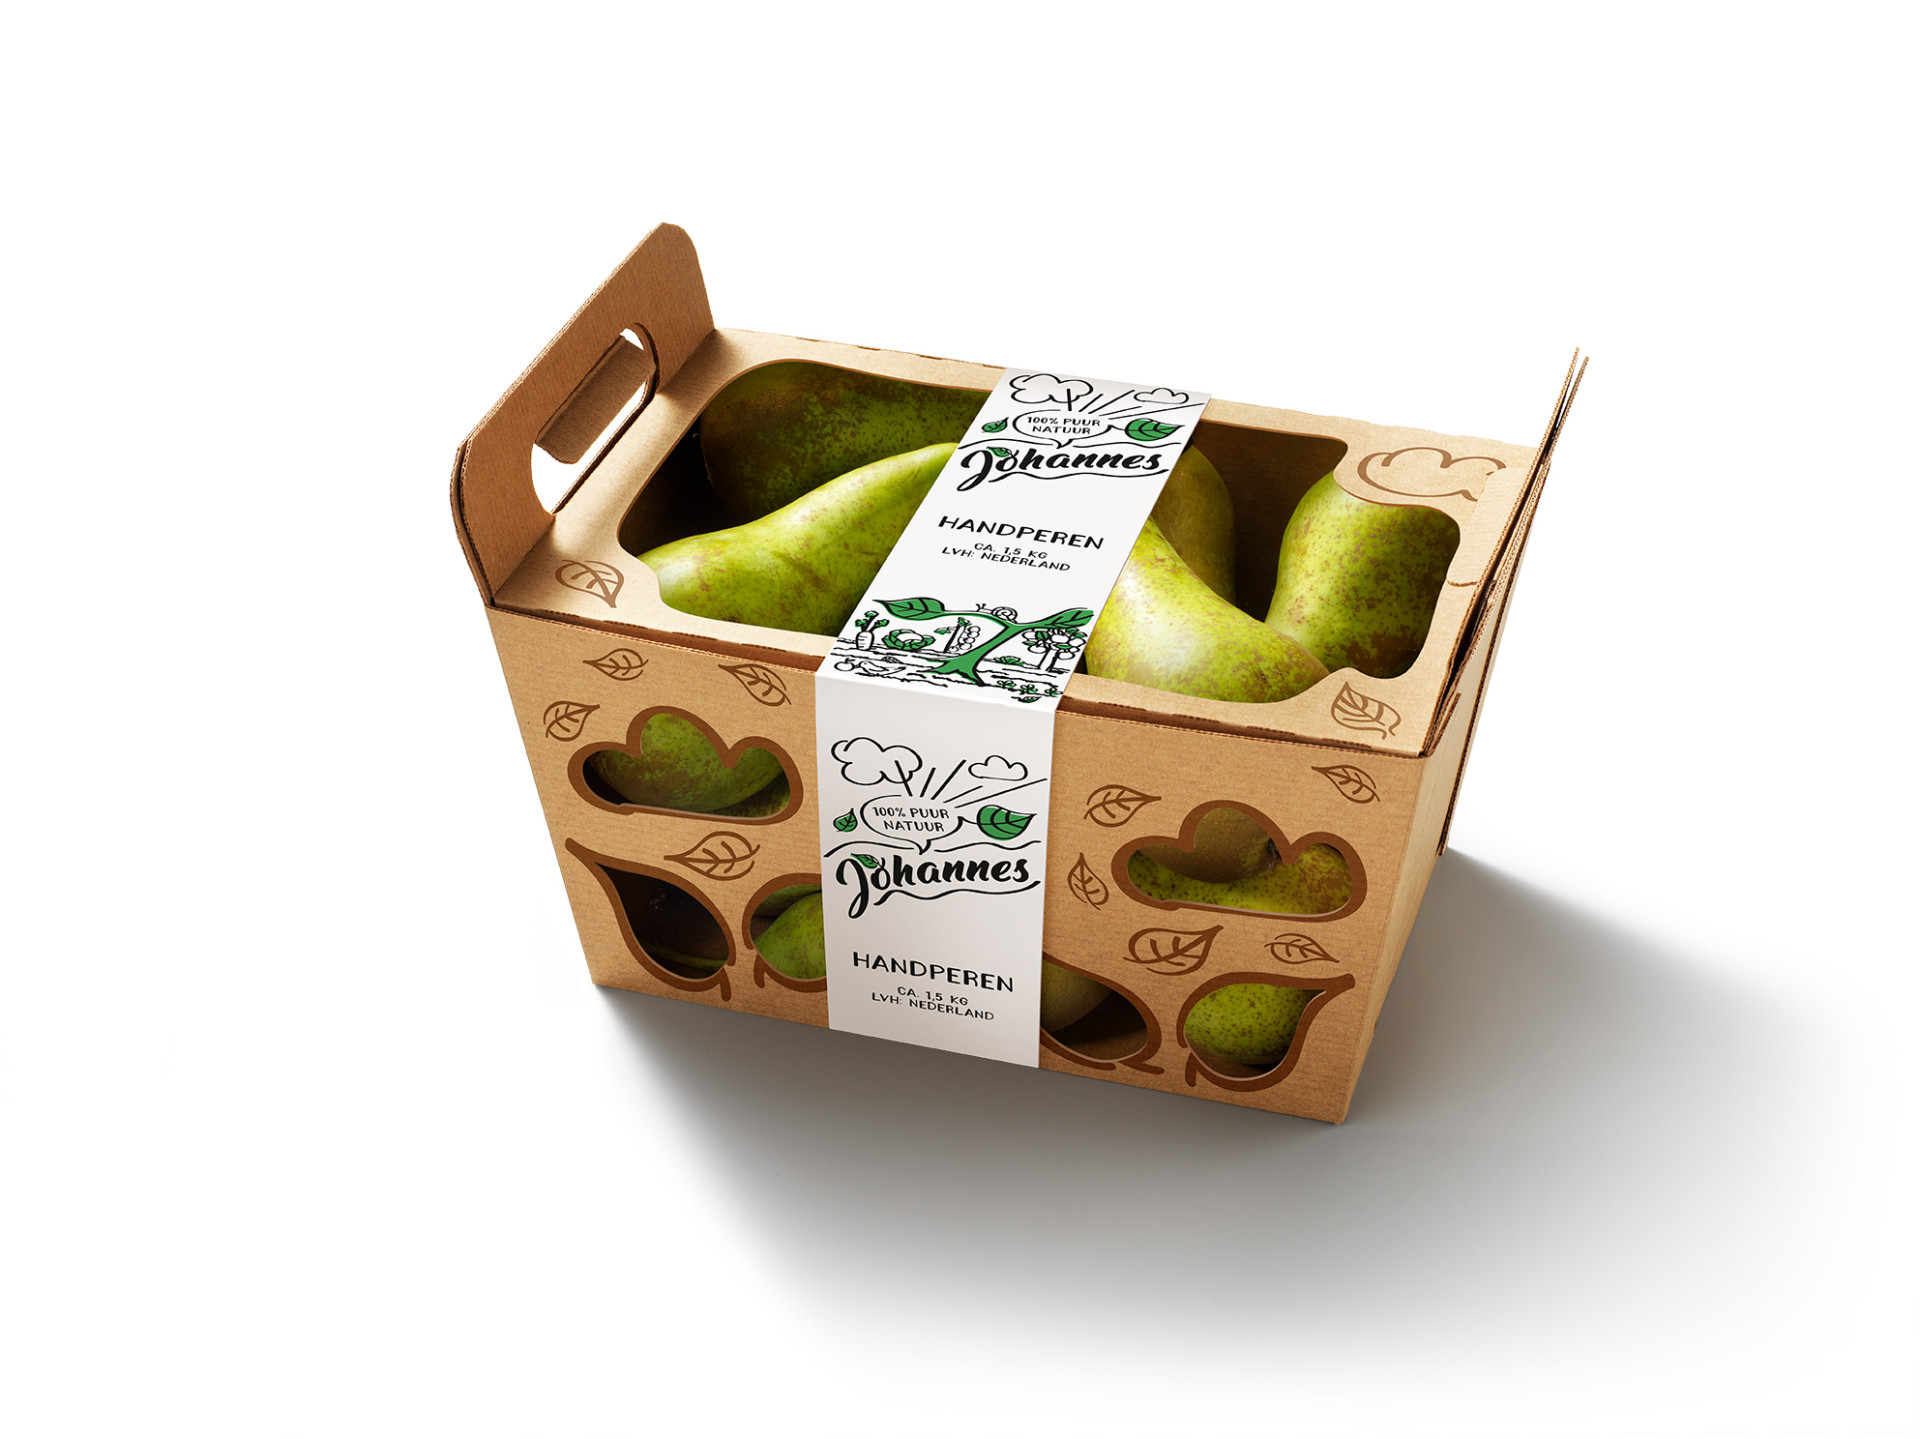 Carton-tray-packaged-pears-BB747DBCD5